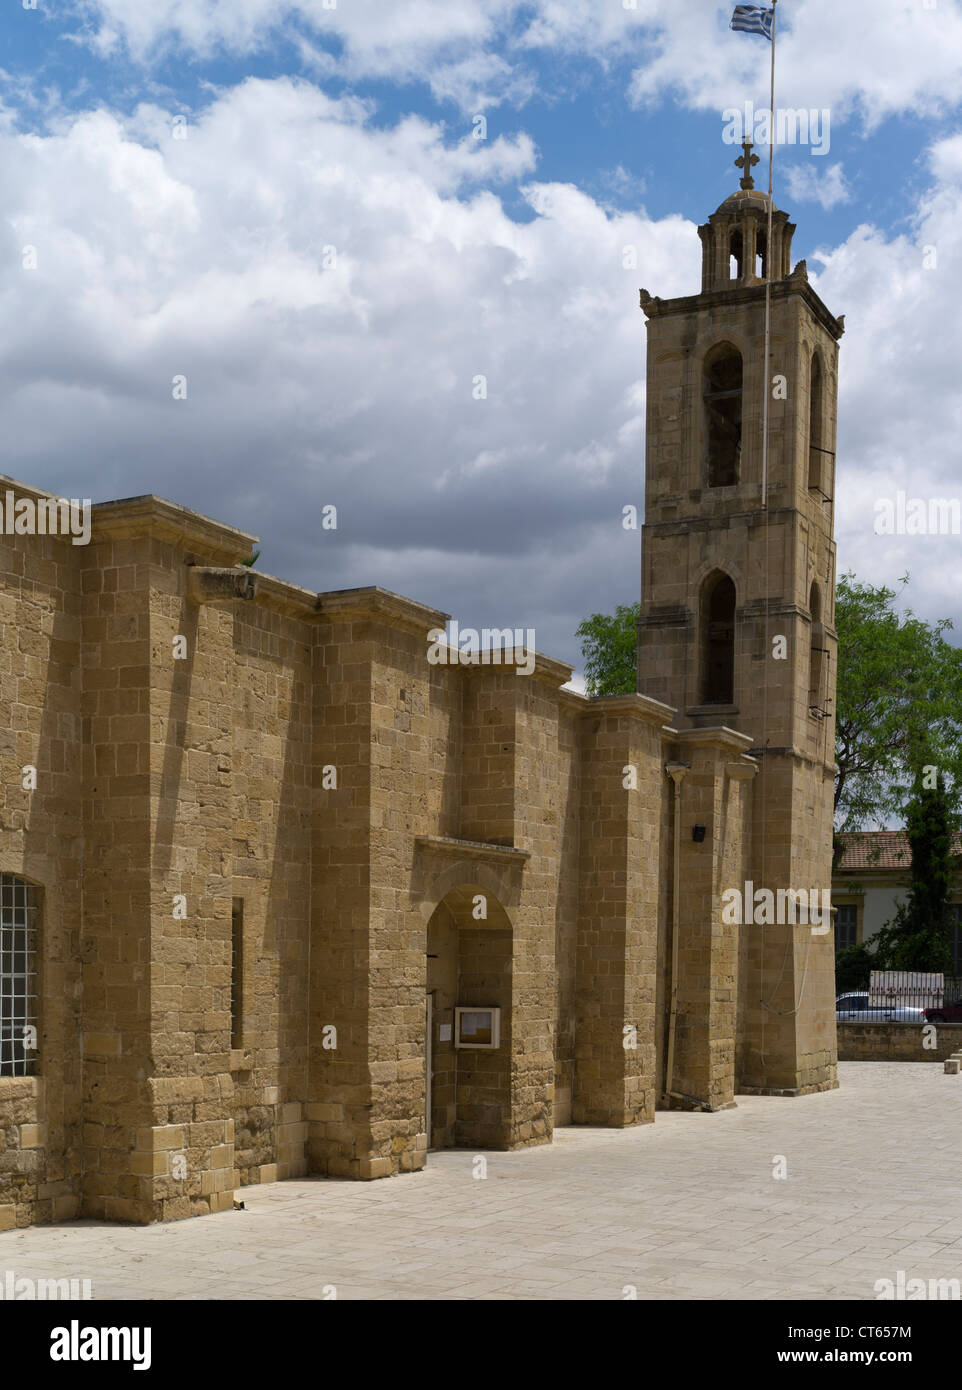 dh Old town South NICOSIA CYPRUS Agios Ioannis St John cathedral building belfry bell tower saint johns church Stock Photo